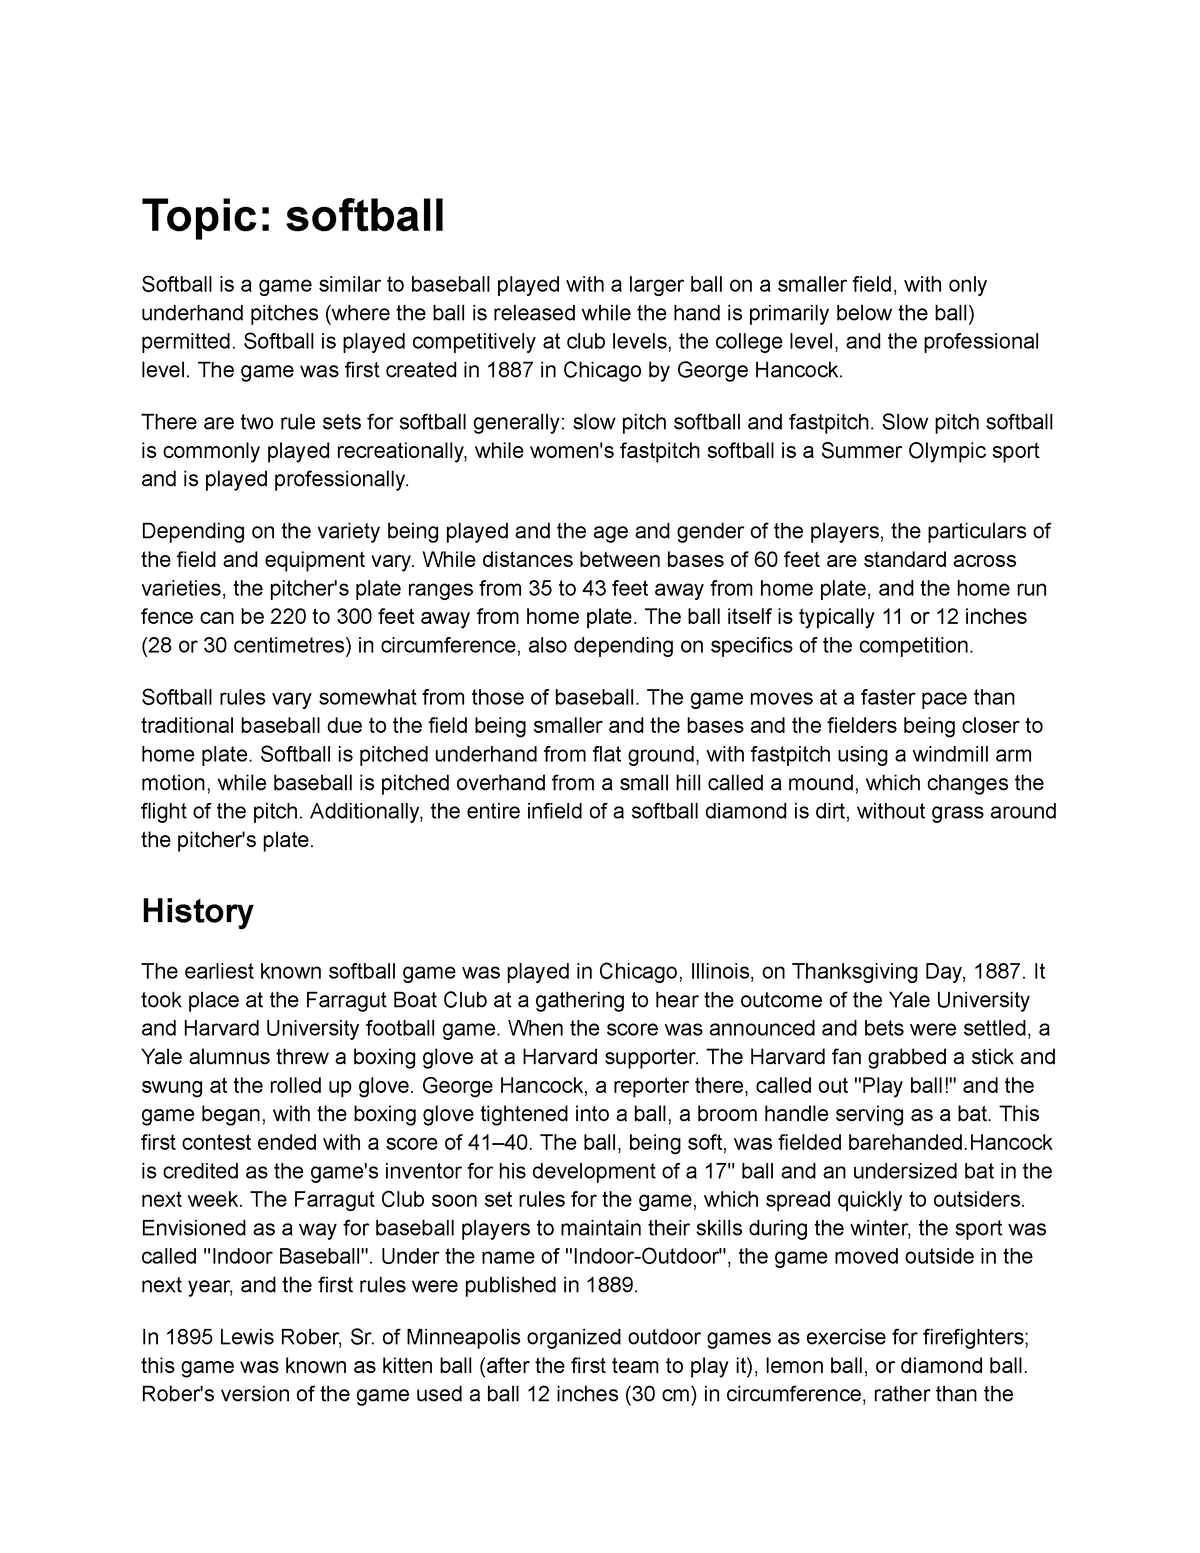 classification essay about softball